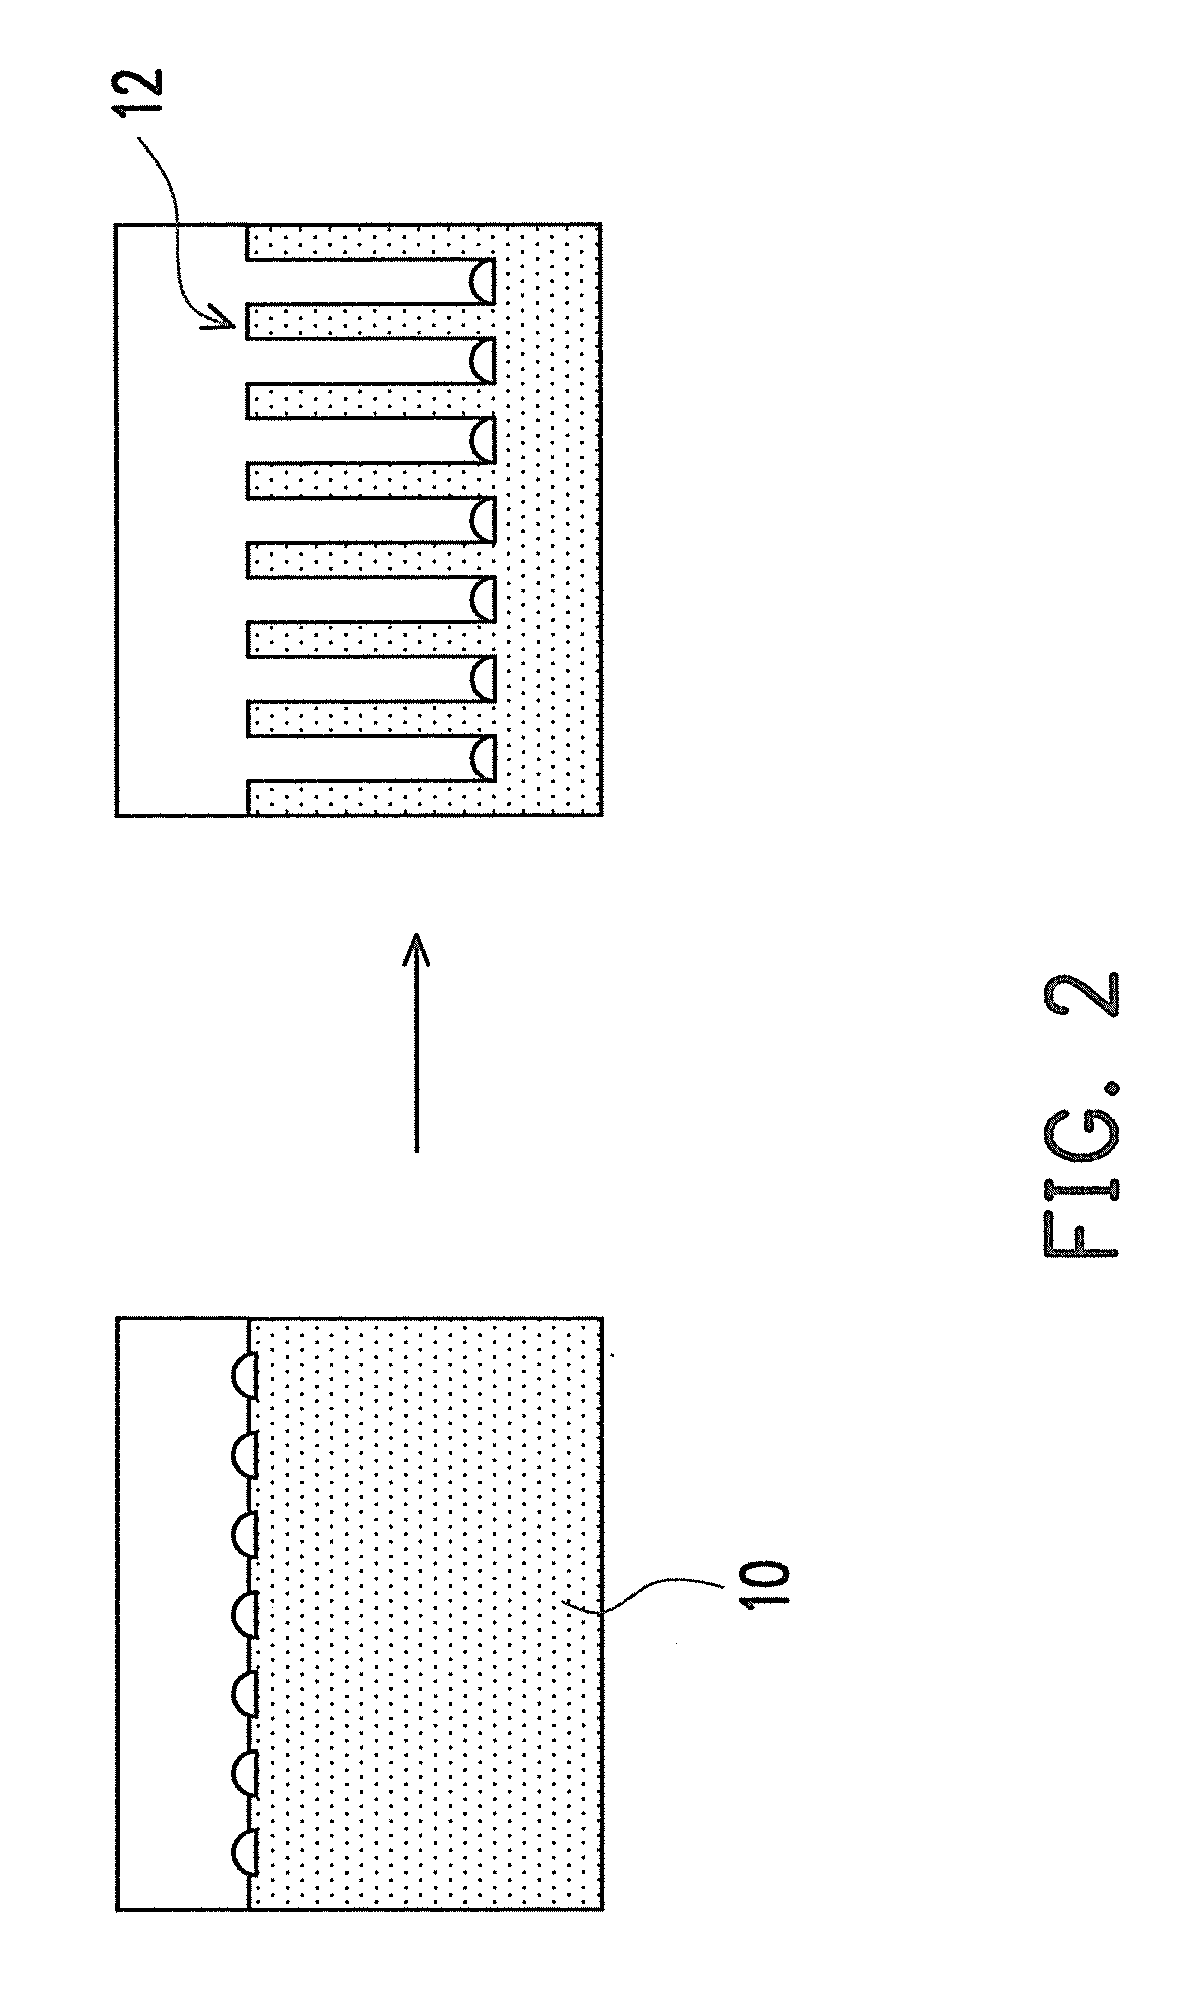 Nanowire thermoelectric device